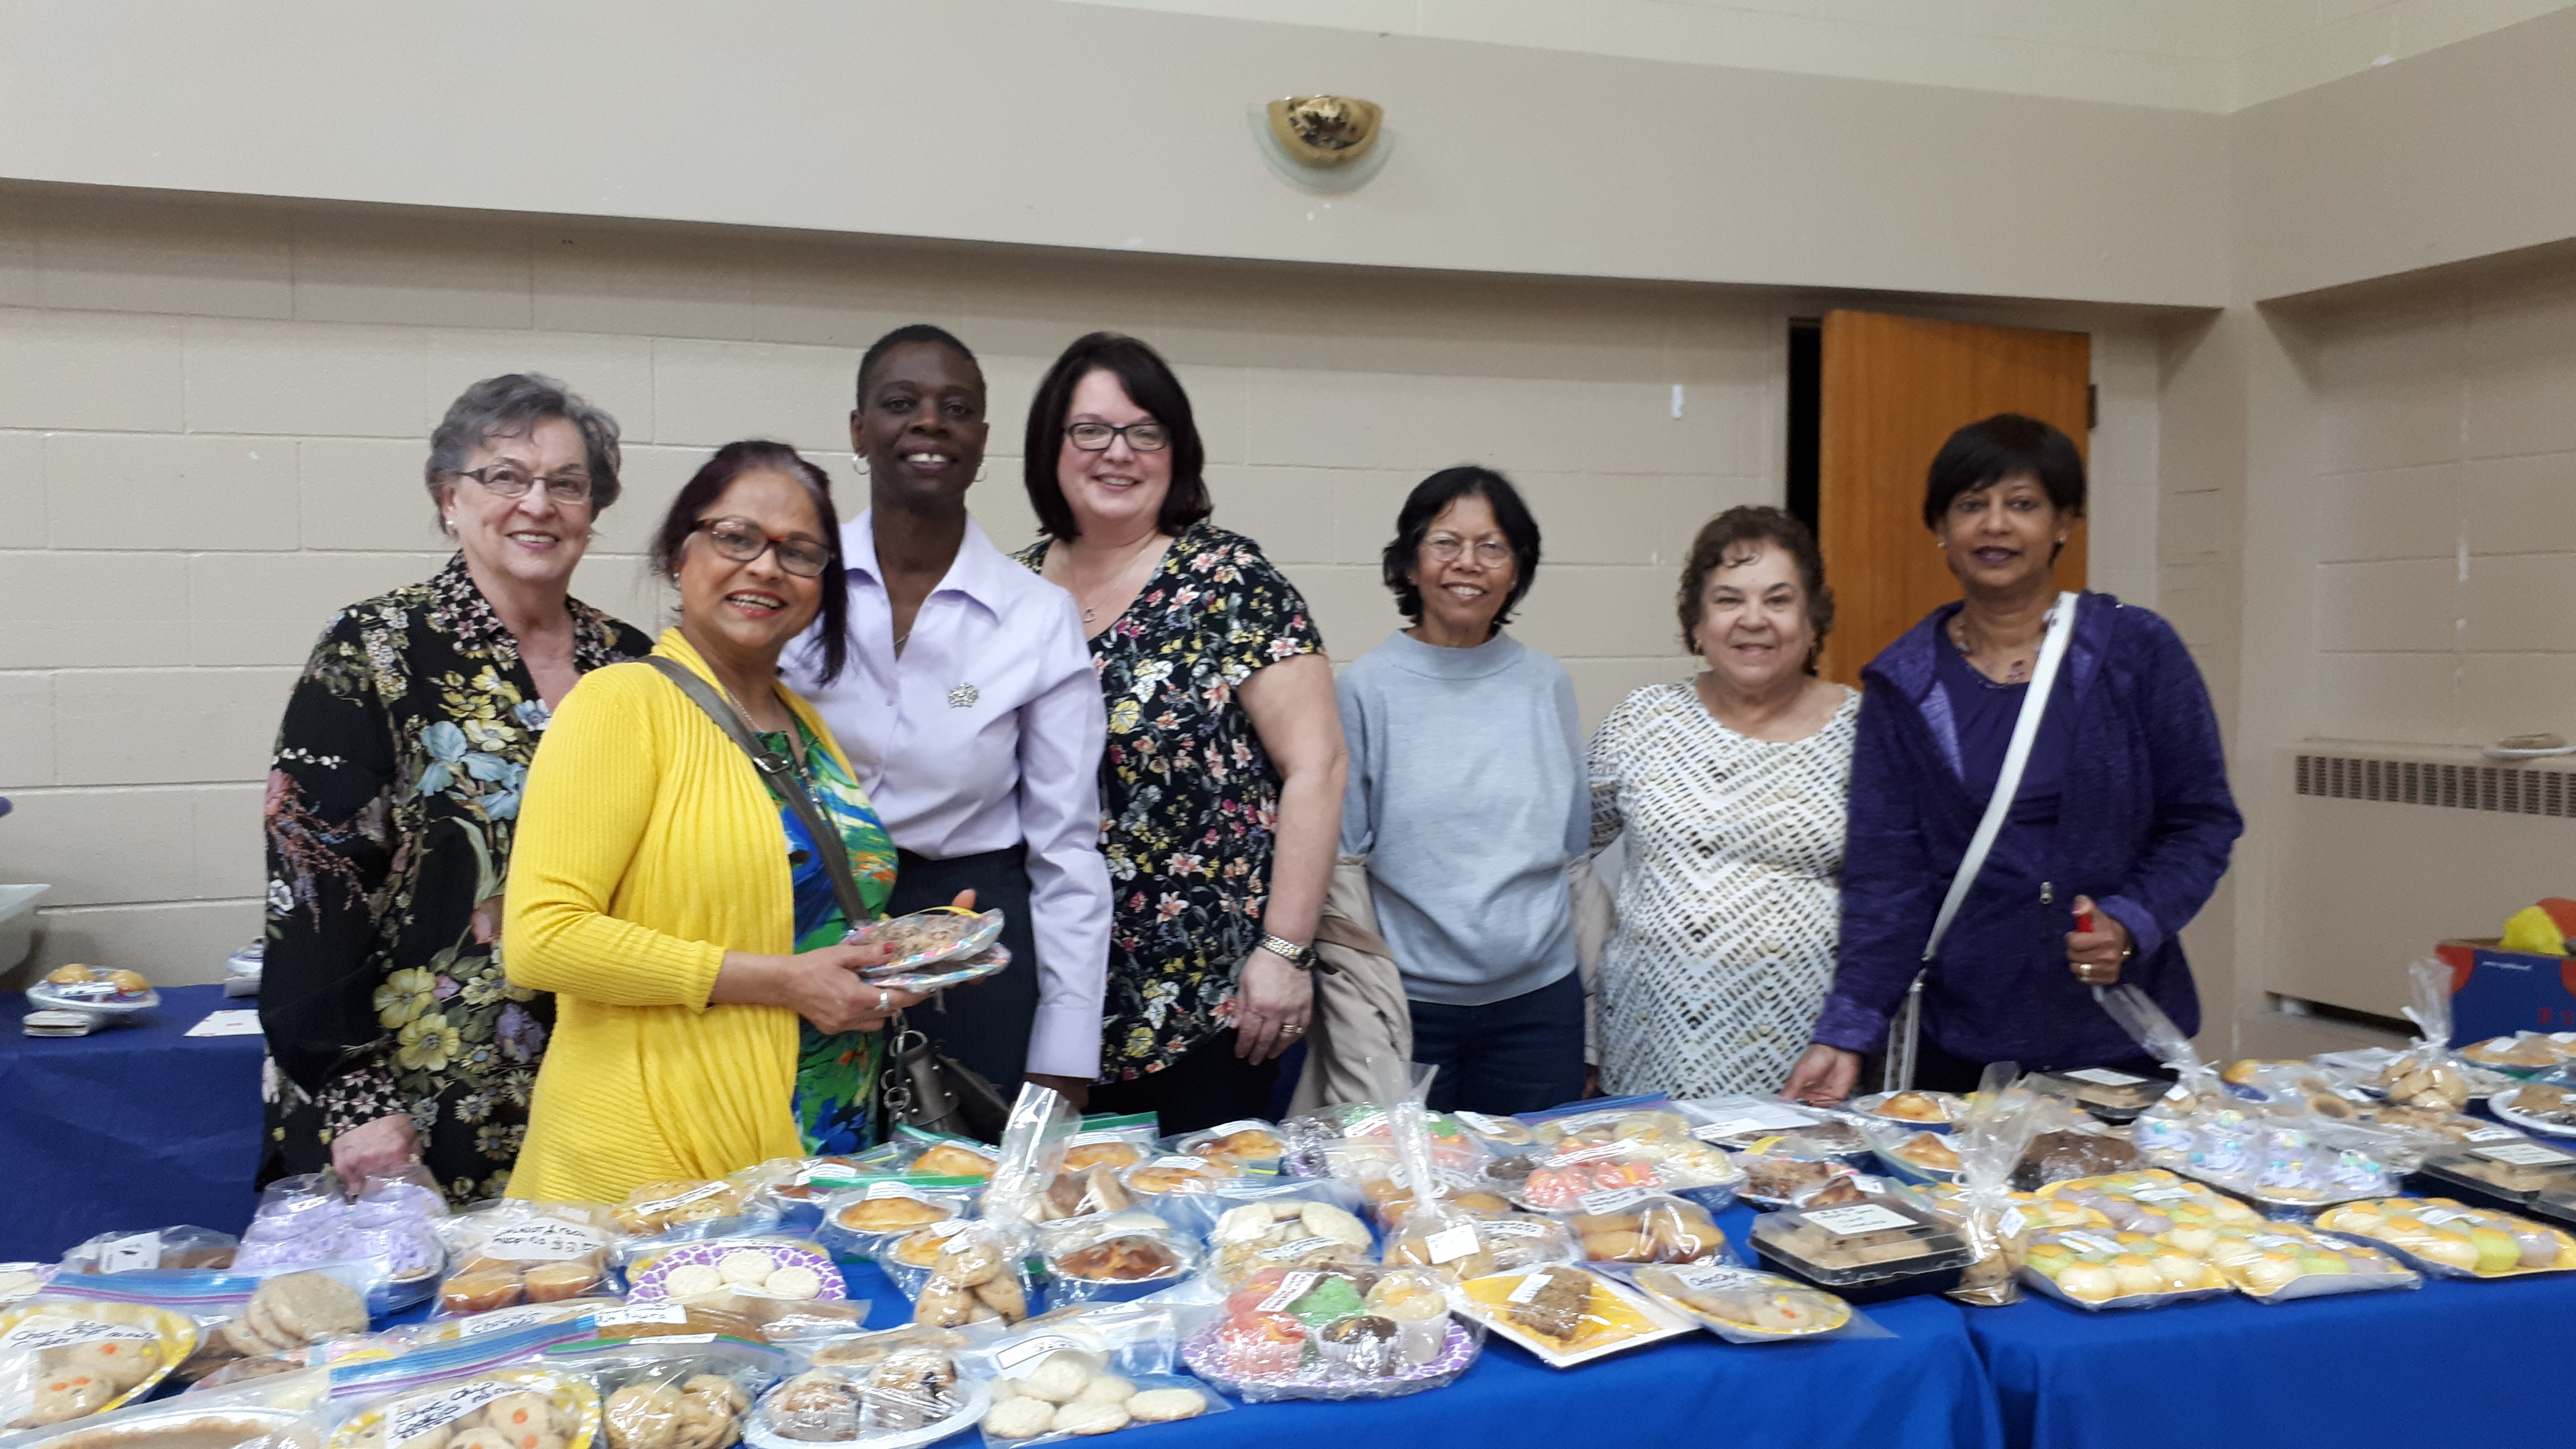 cwl members helping at the baking table